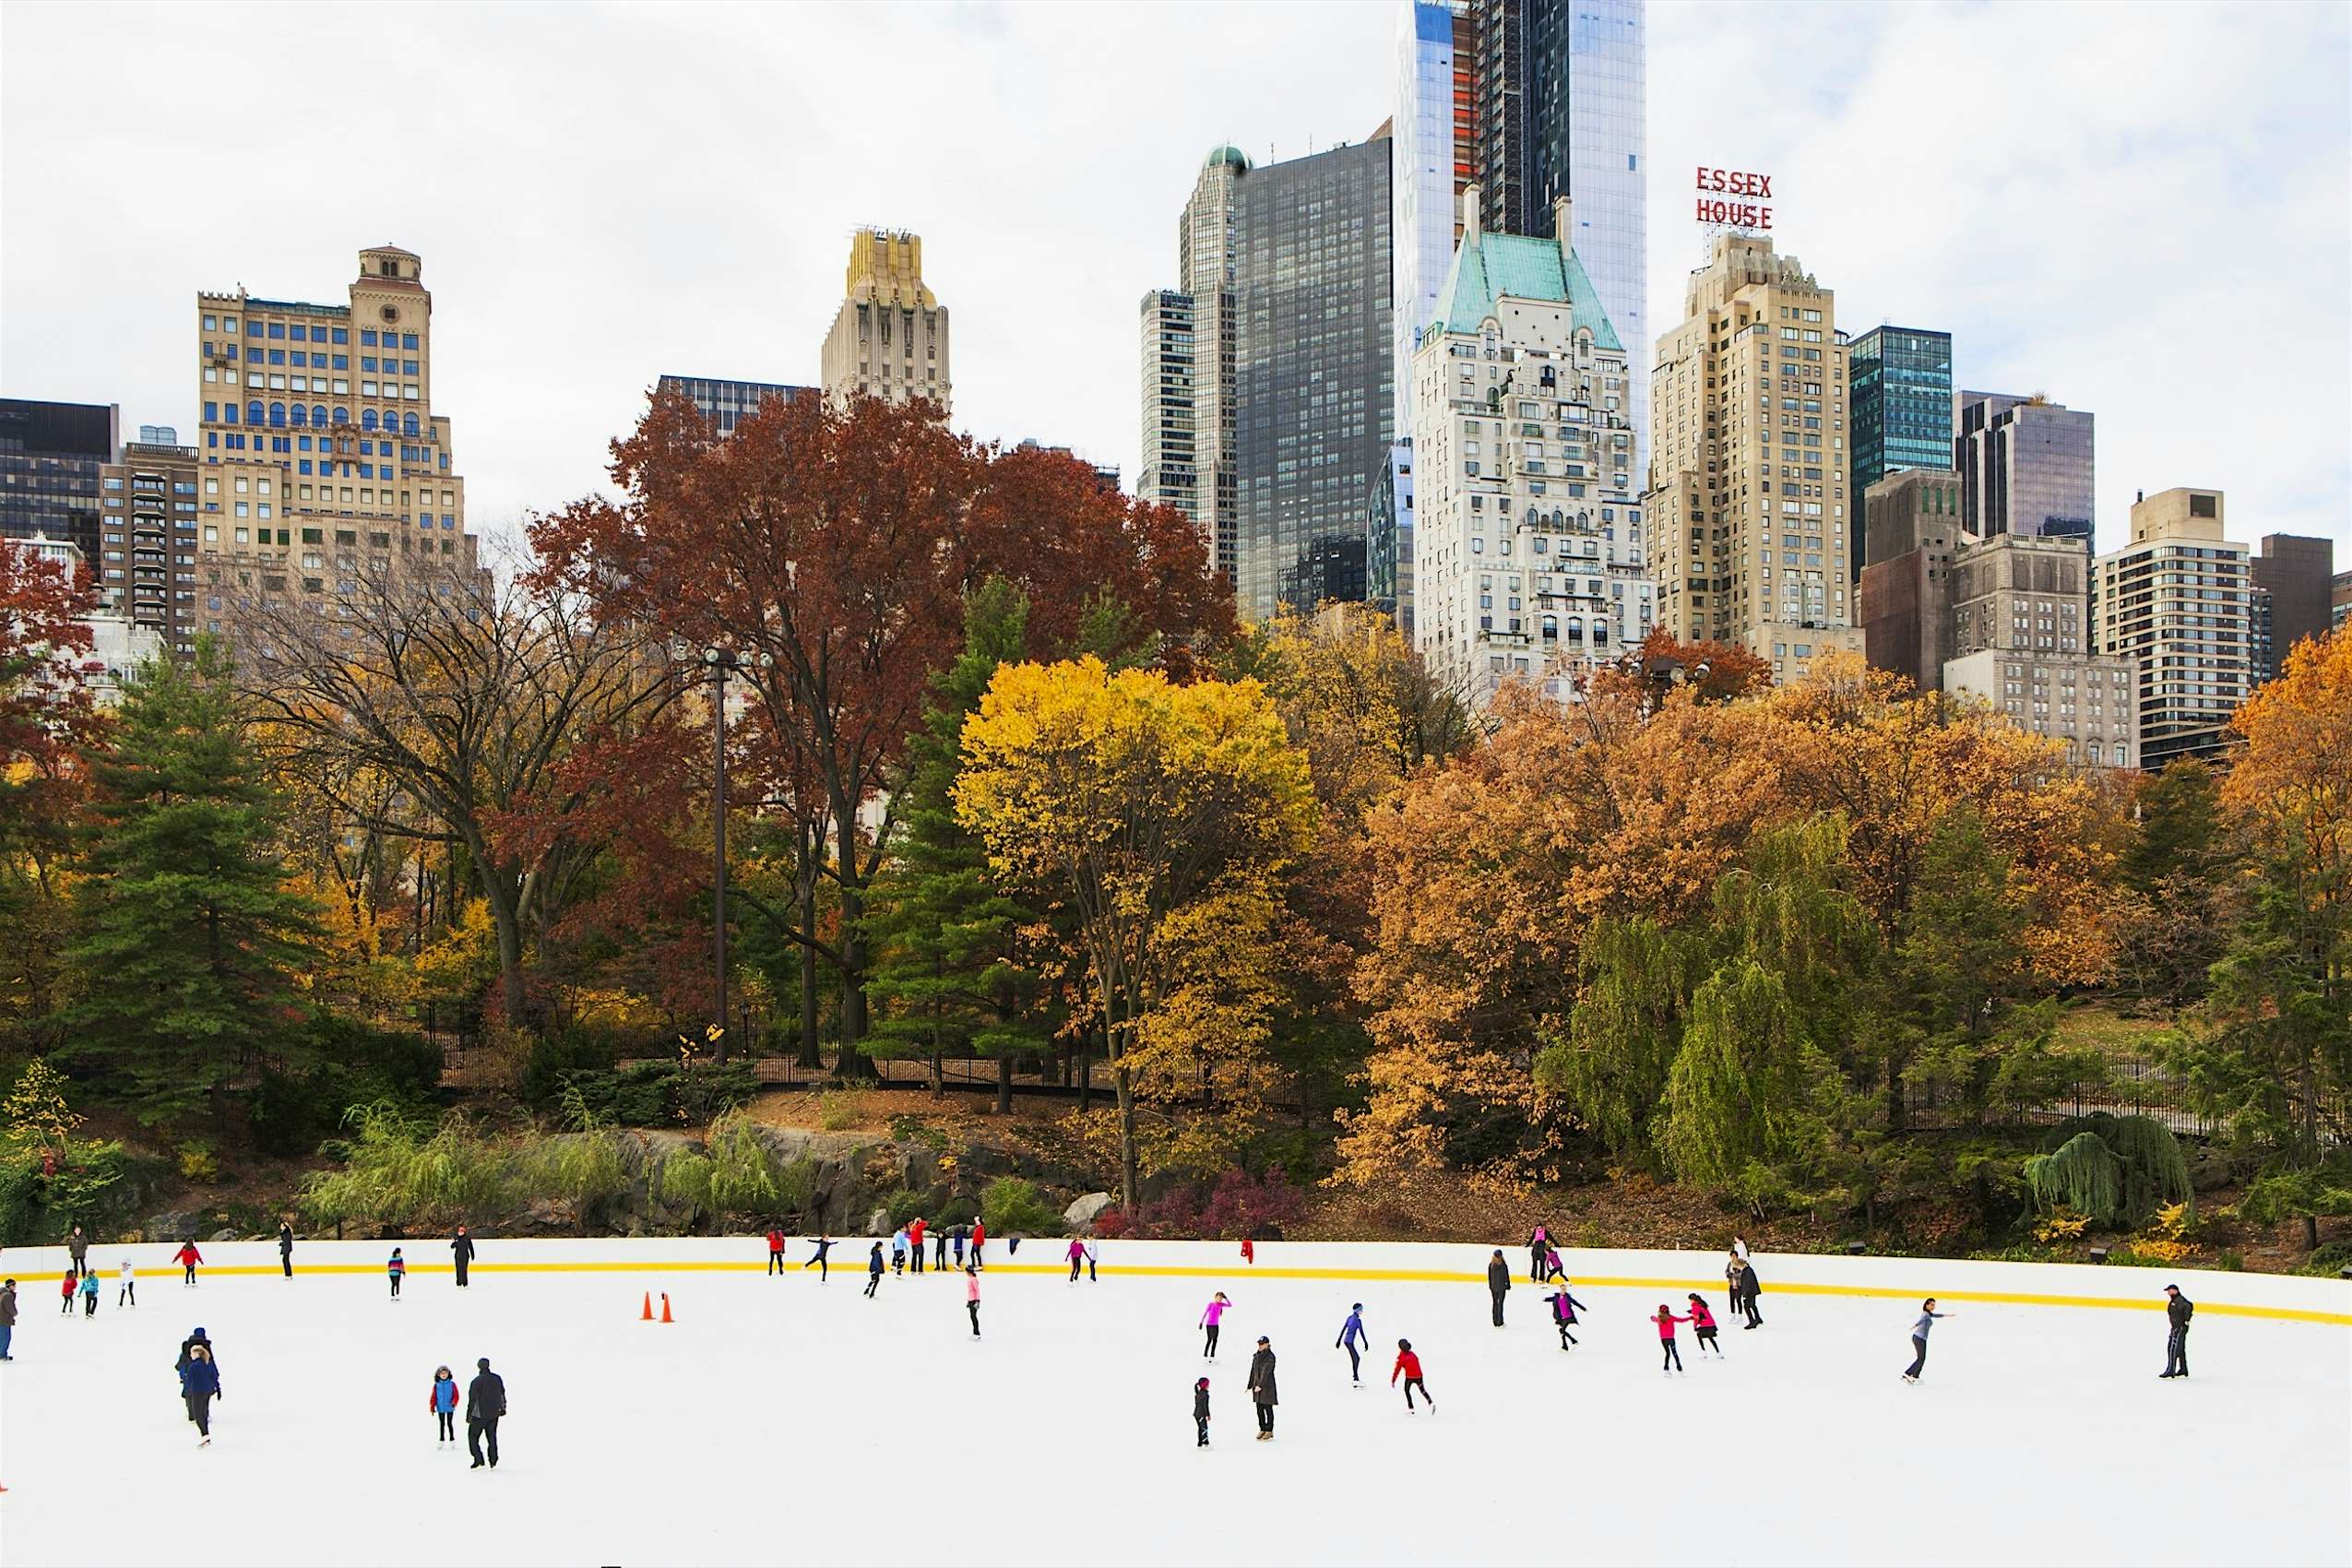 places in new york to visit in winter